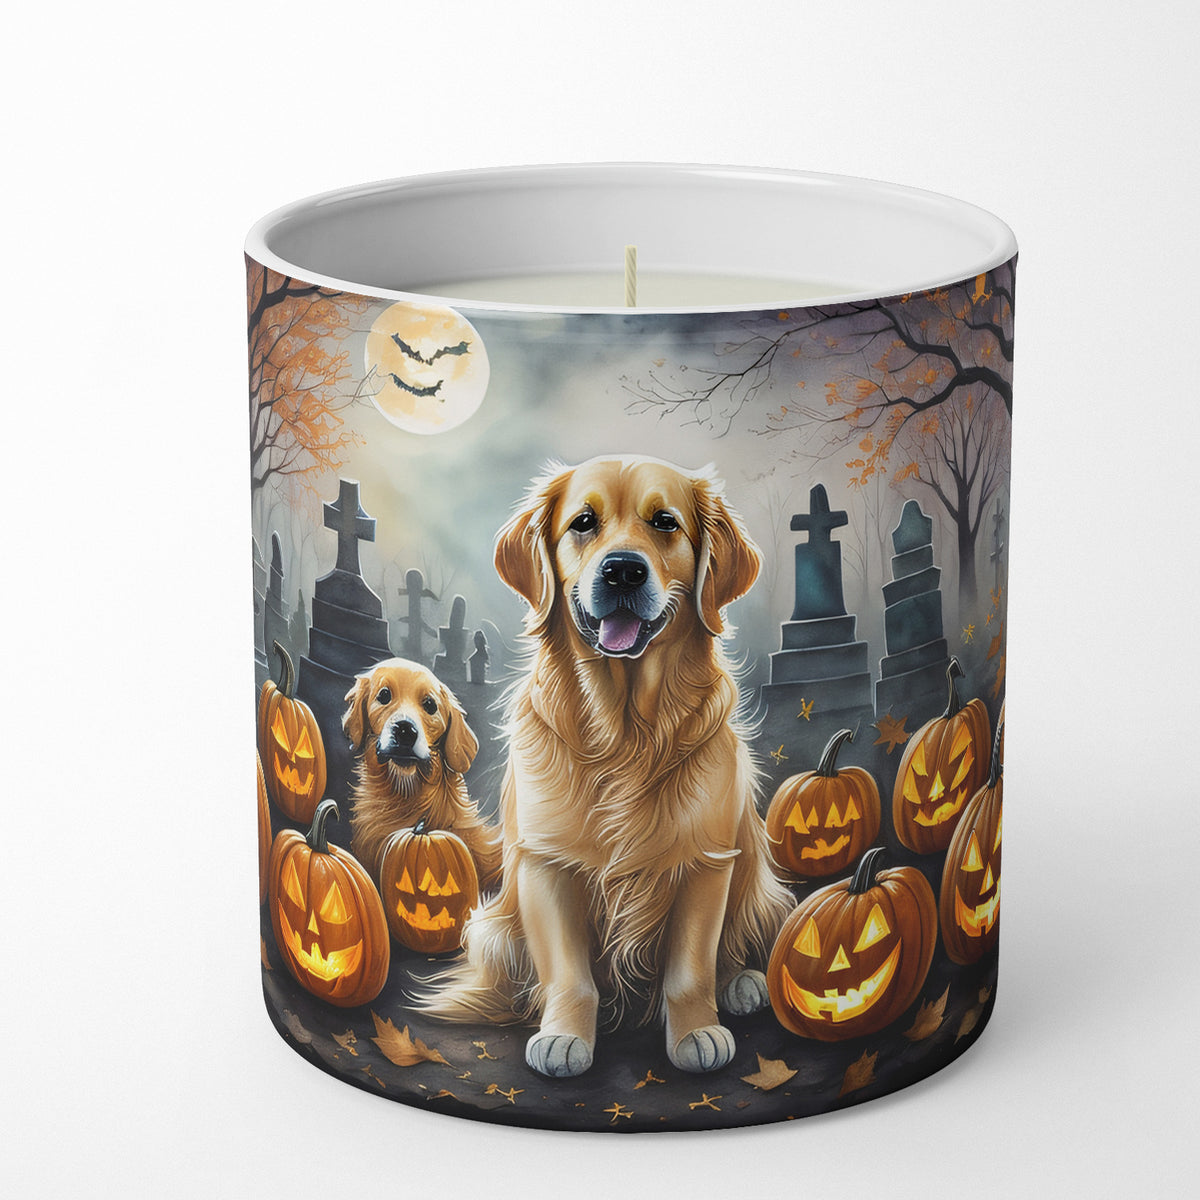 Buy this Golden Retriever Spooky Halloween Decorative Soy Candle